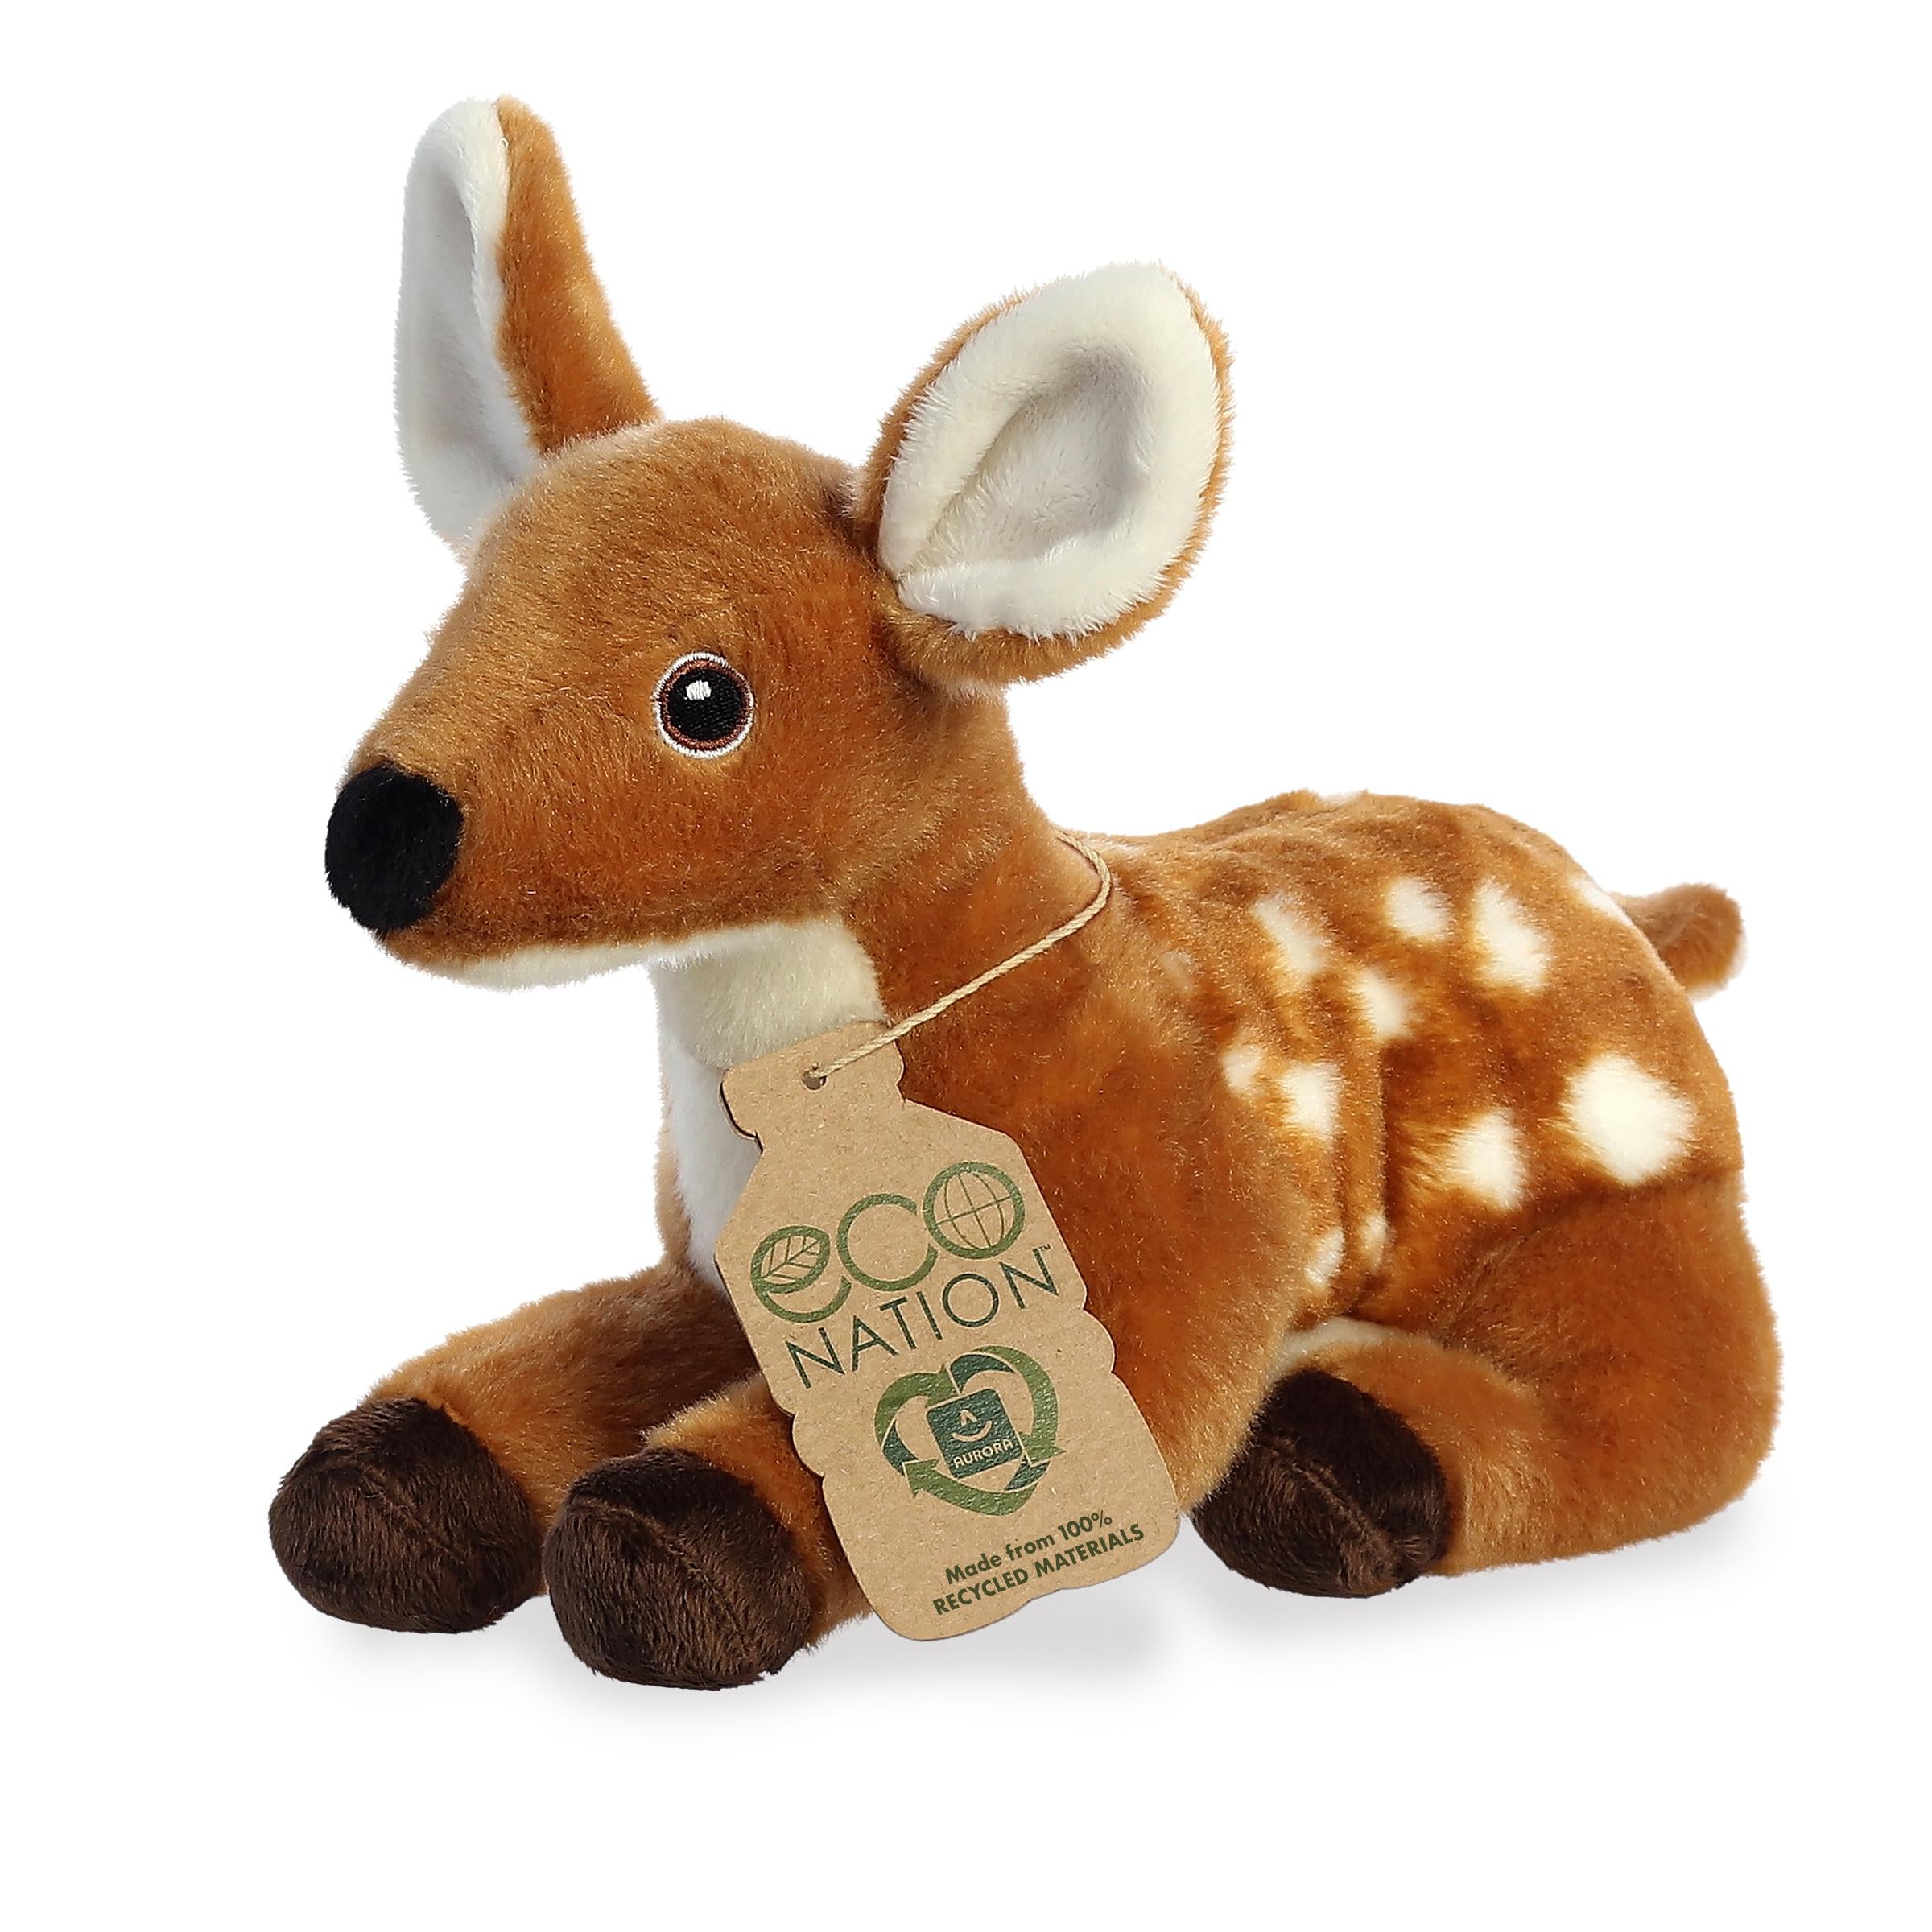 A delightful baby deer fawn plush with a brown coat with white spots, embroidered eyes, and an eco-nation tag